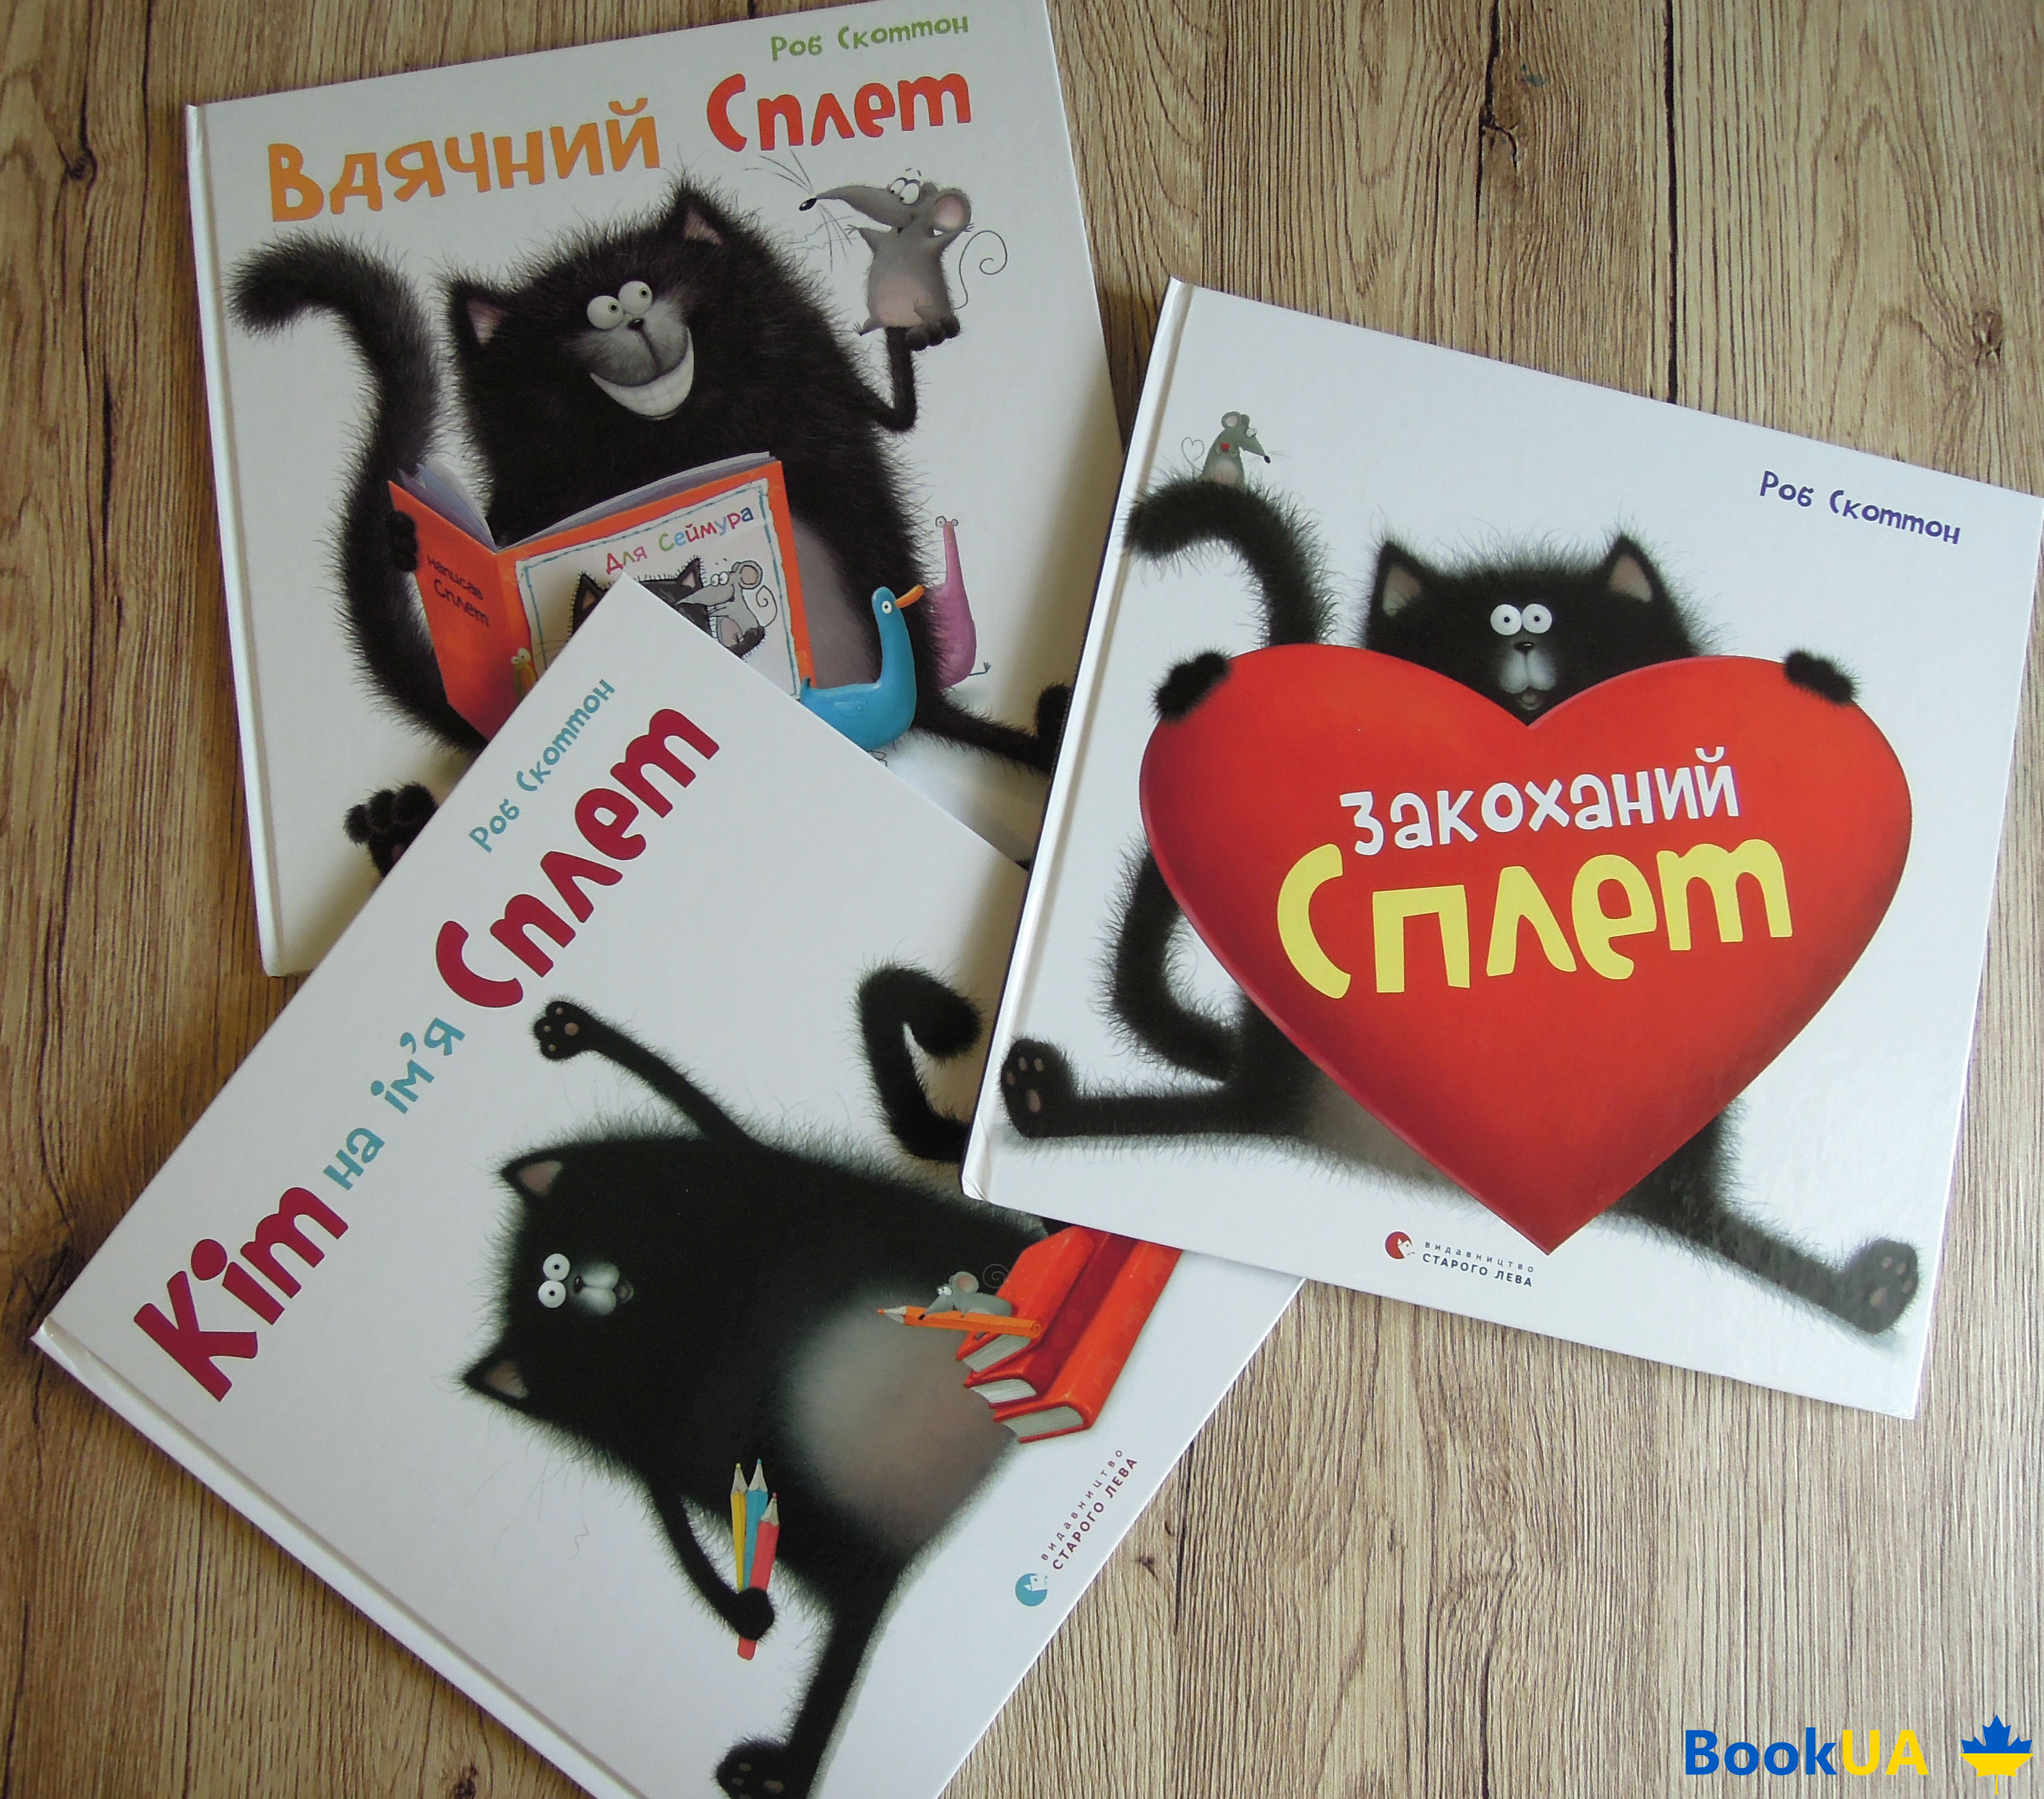 The series of books about the cat Splet